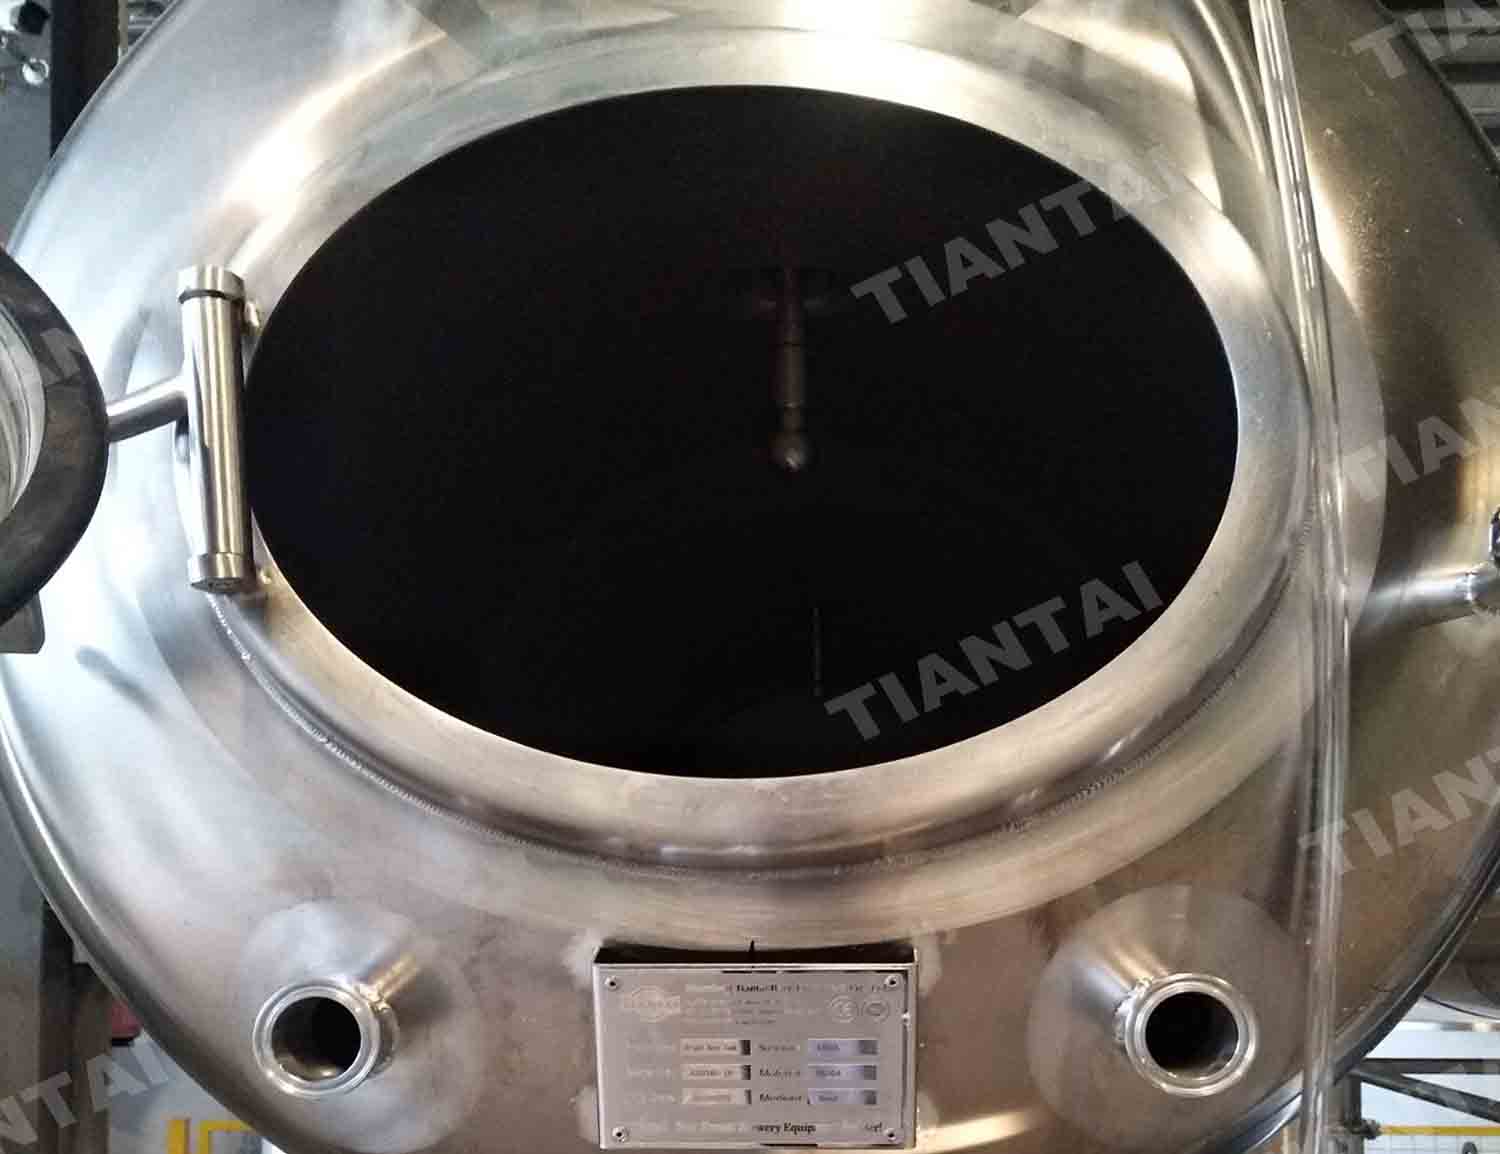 <b>Why horizontal brite tank is equipped with a bag</b>